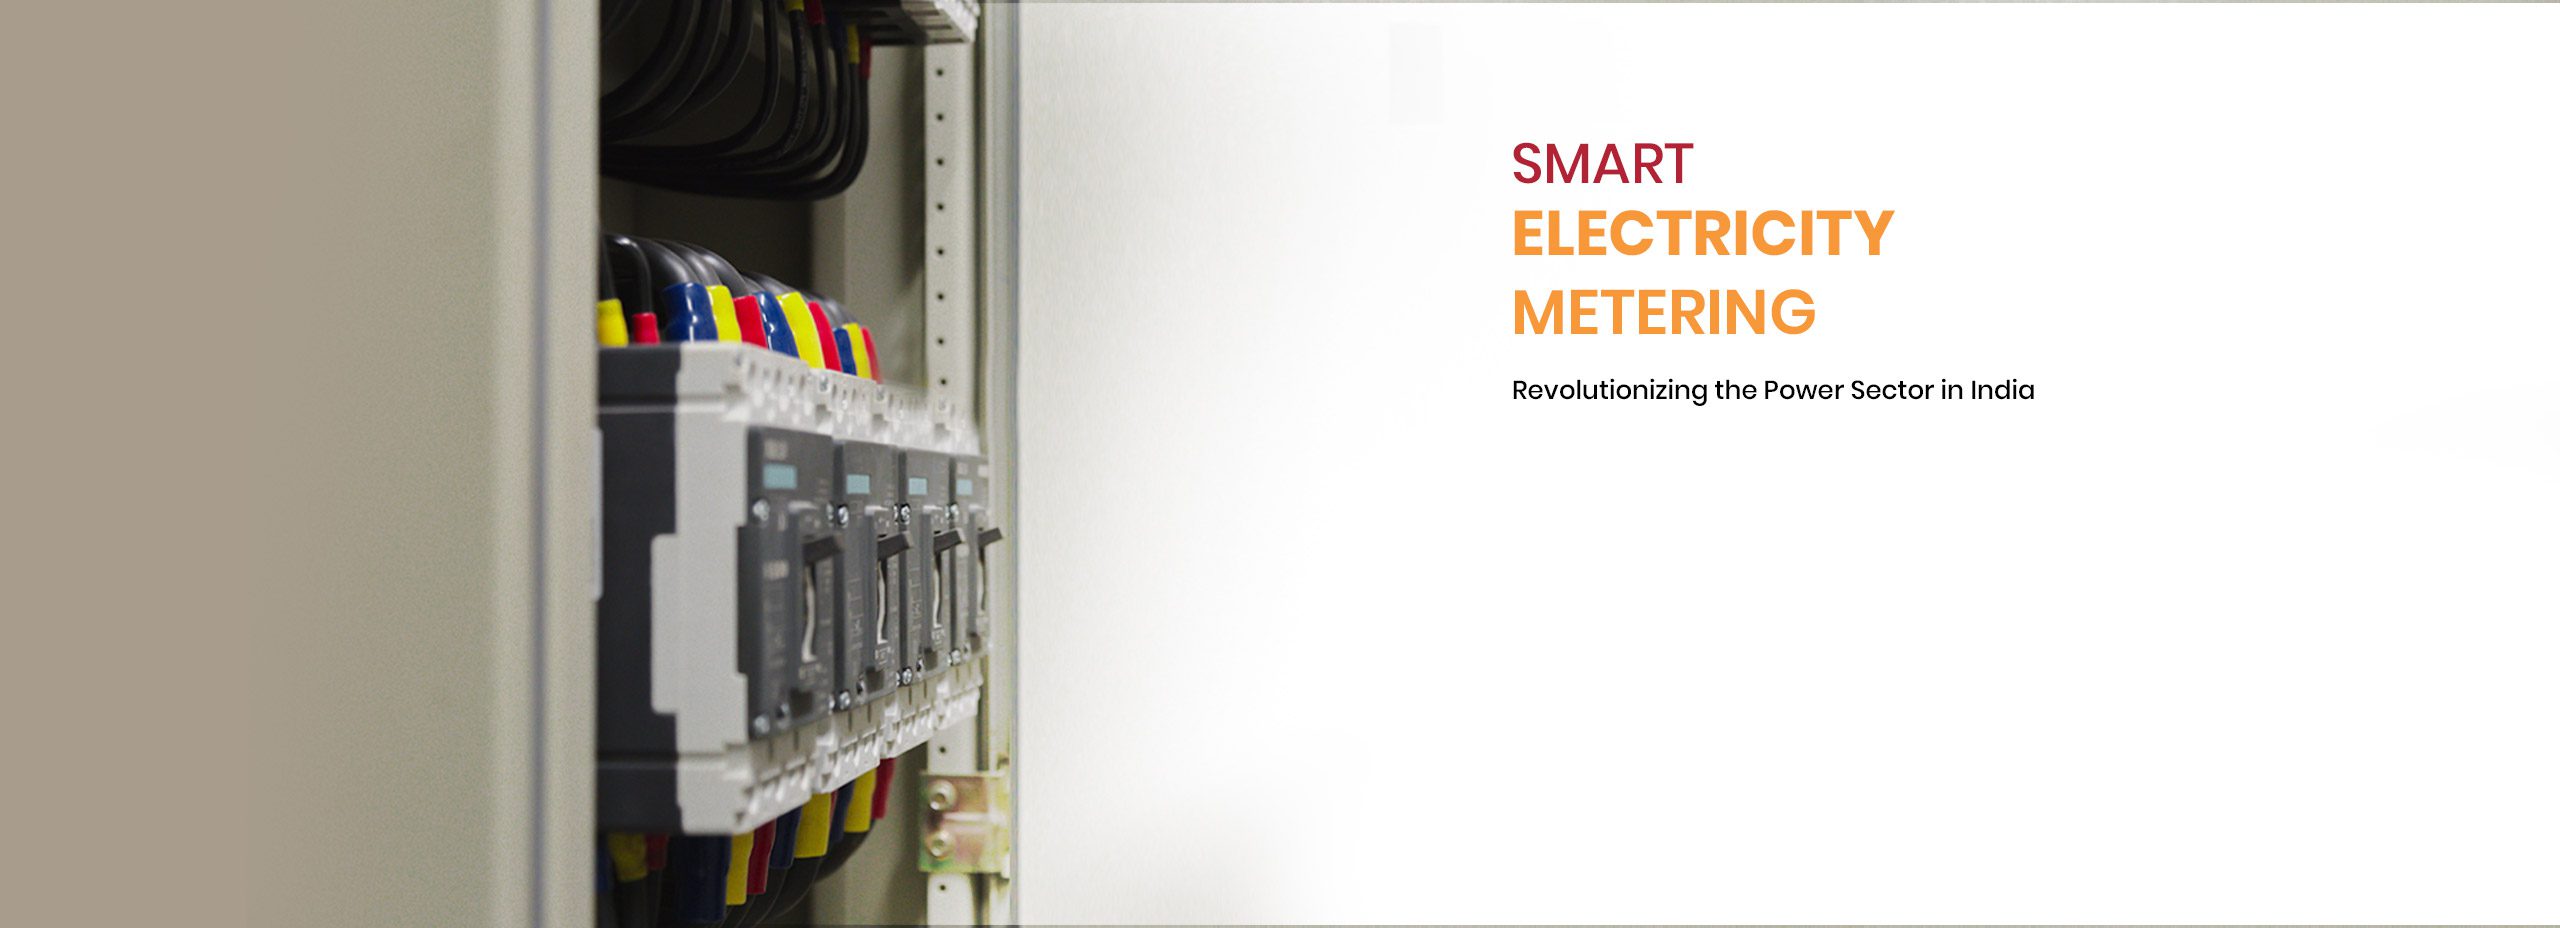 Smart Electricity Metering – Revolutionizing the Power Sector in India